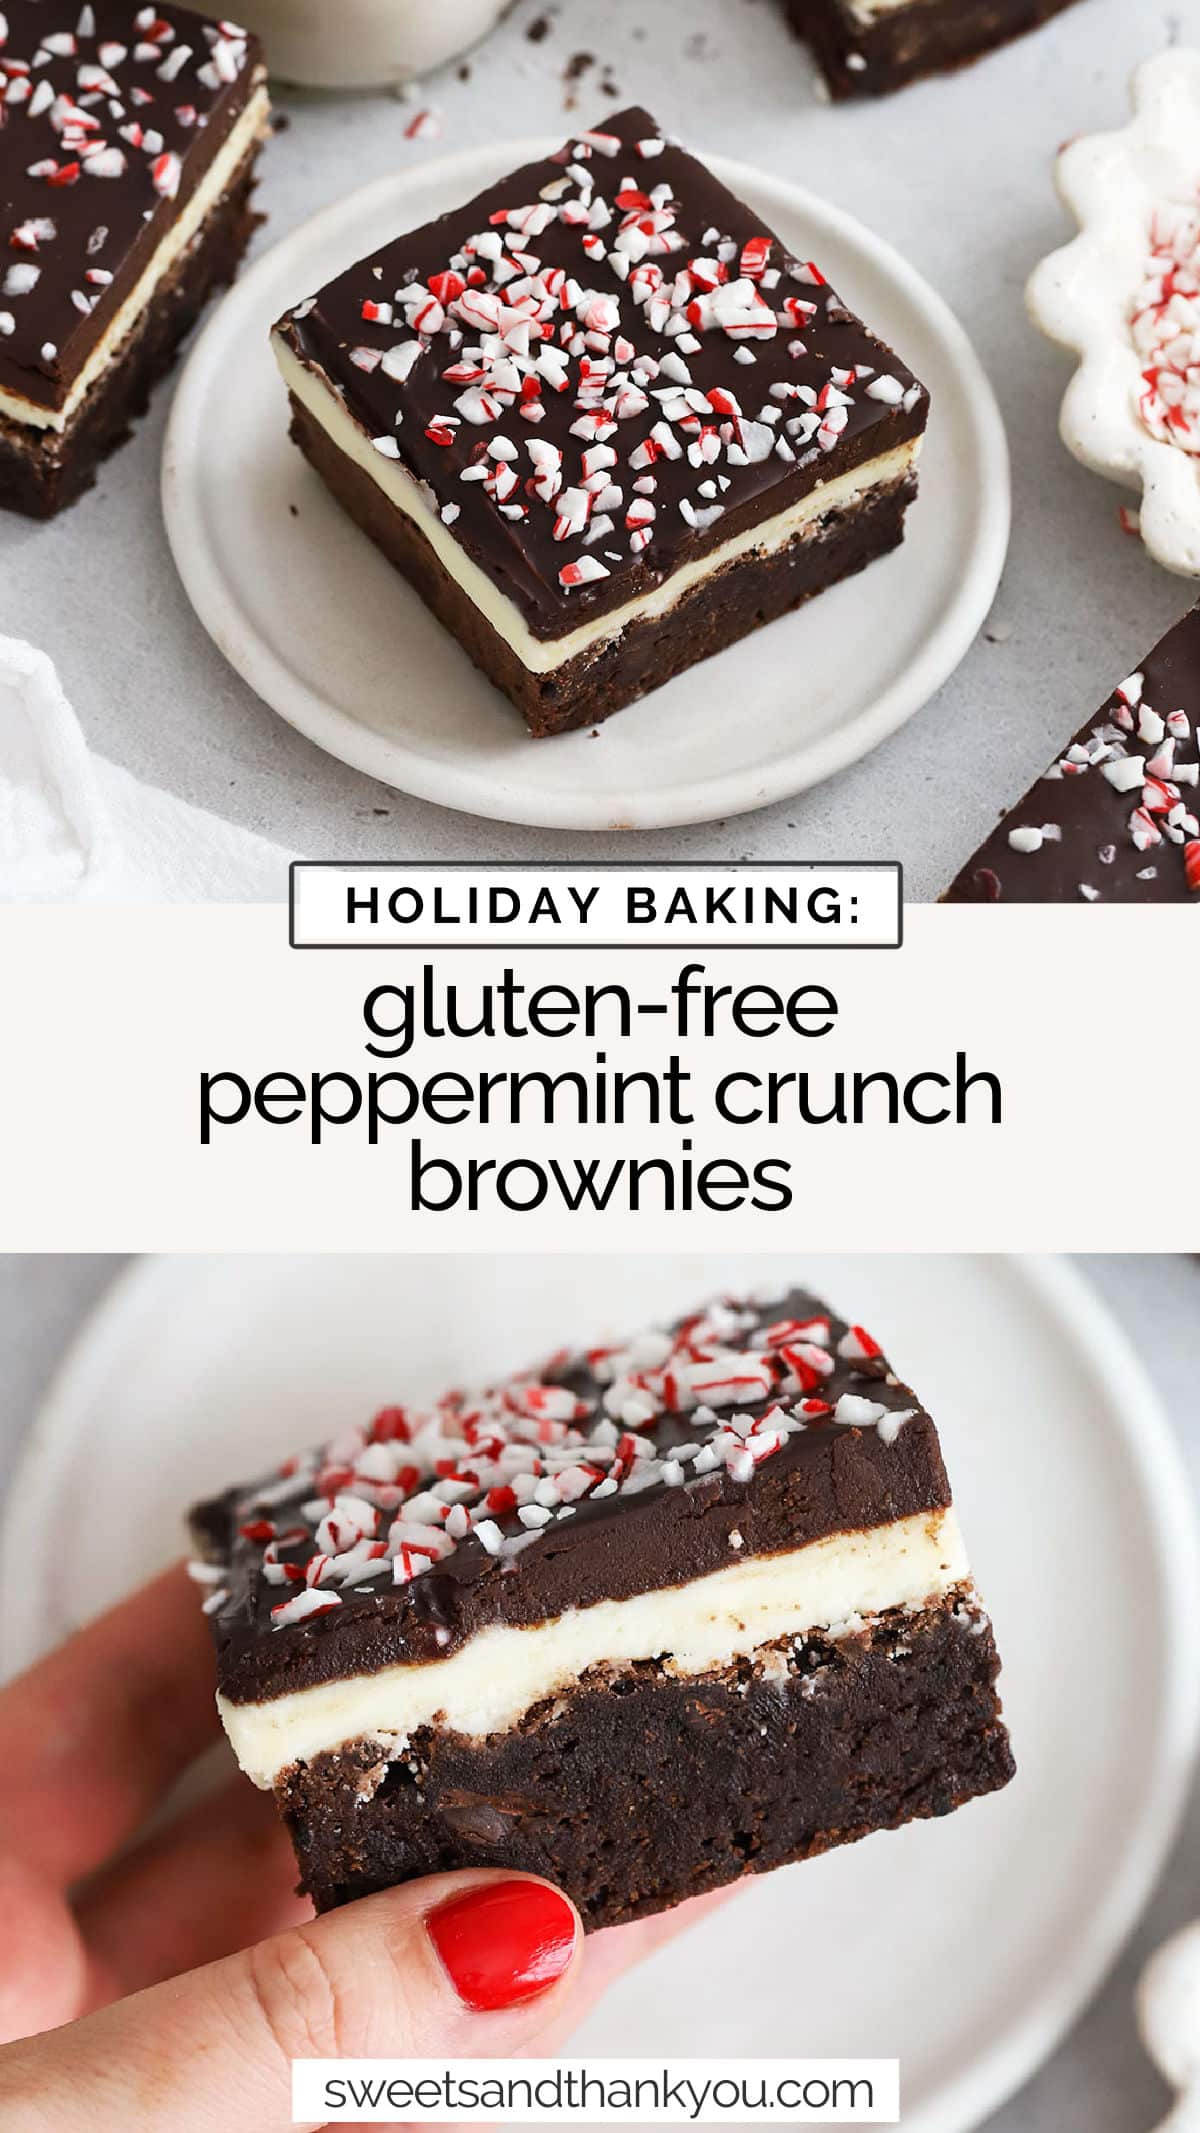 Our Gluten-Free Peppermint Crunch Brownies (aka Christmas Brownies or Peppermint Bark Brownies!) are made with layers of chewy gluten-free brownies, peppermint frosting, an easy chocolate ganache & crunchy bits candy cane! They're the perfect gluten-free brownies for the holidays. Try adding them to a gluten-free cookie exchange or holiday treat plate for a little extra holiday cheer!